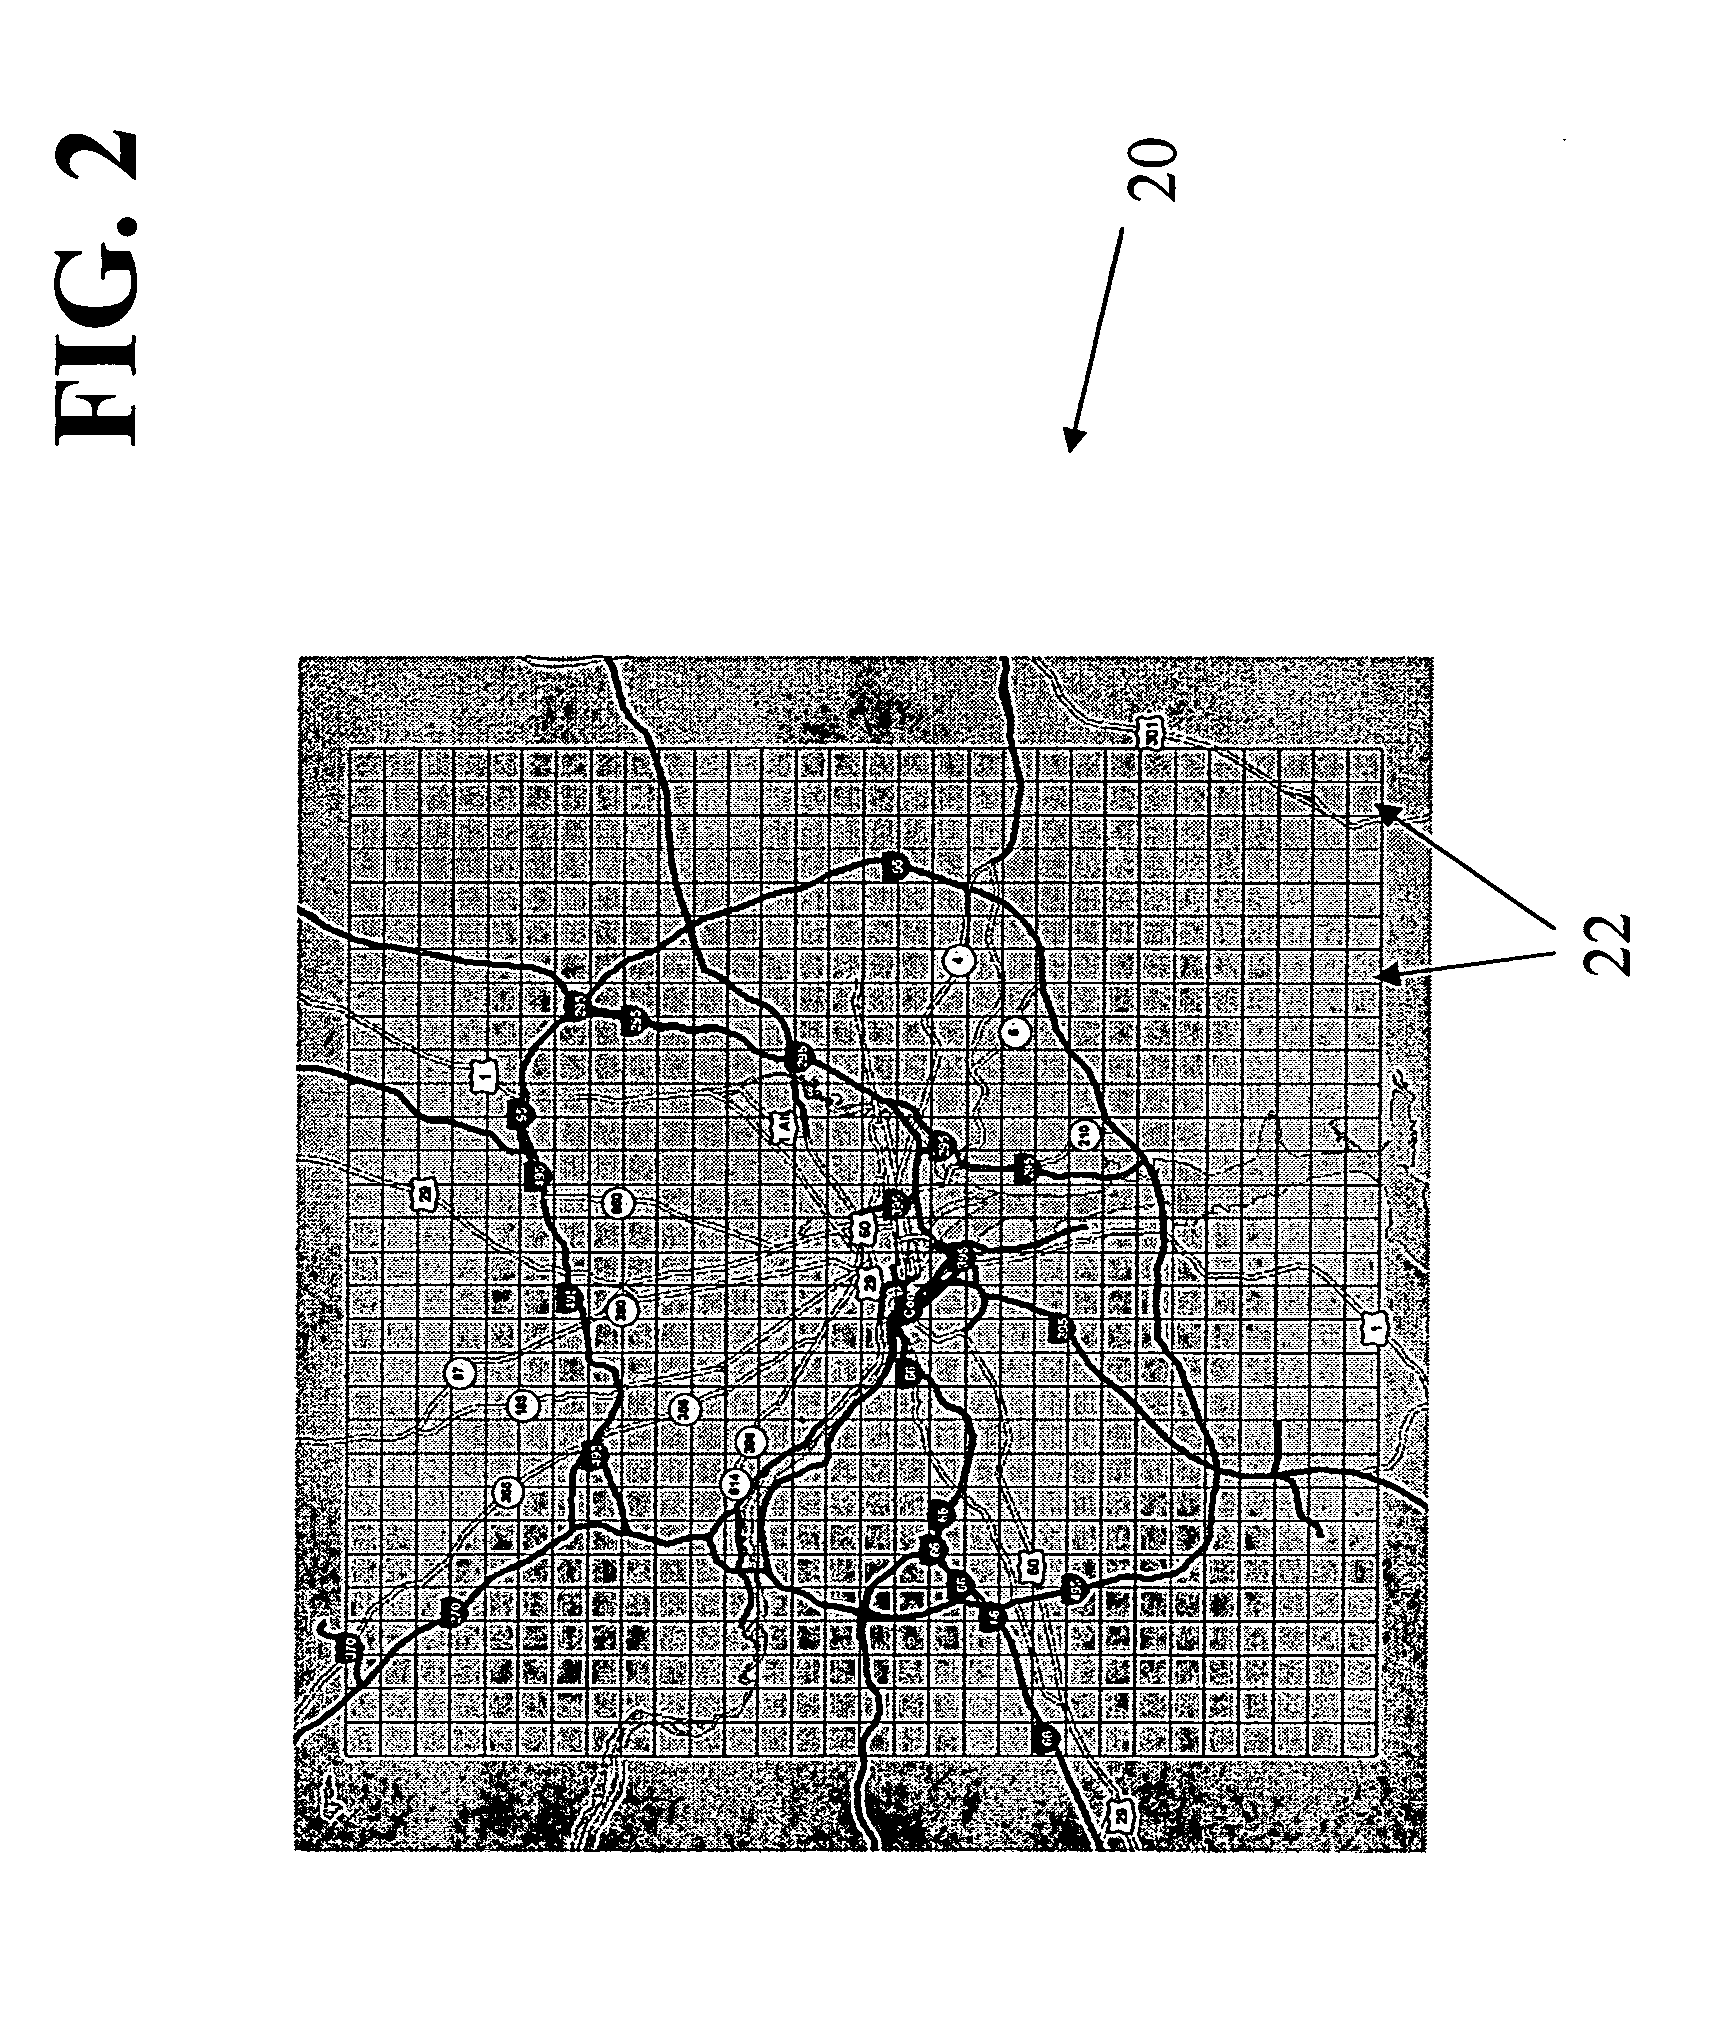 Communication system and method for comprehensive collection, aggregation and dissemination of geospatial information